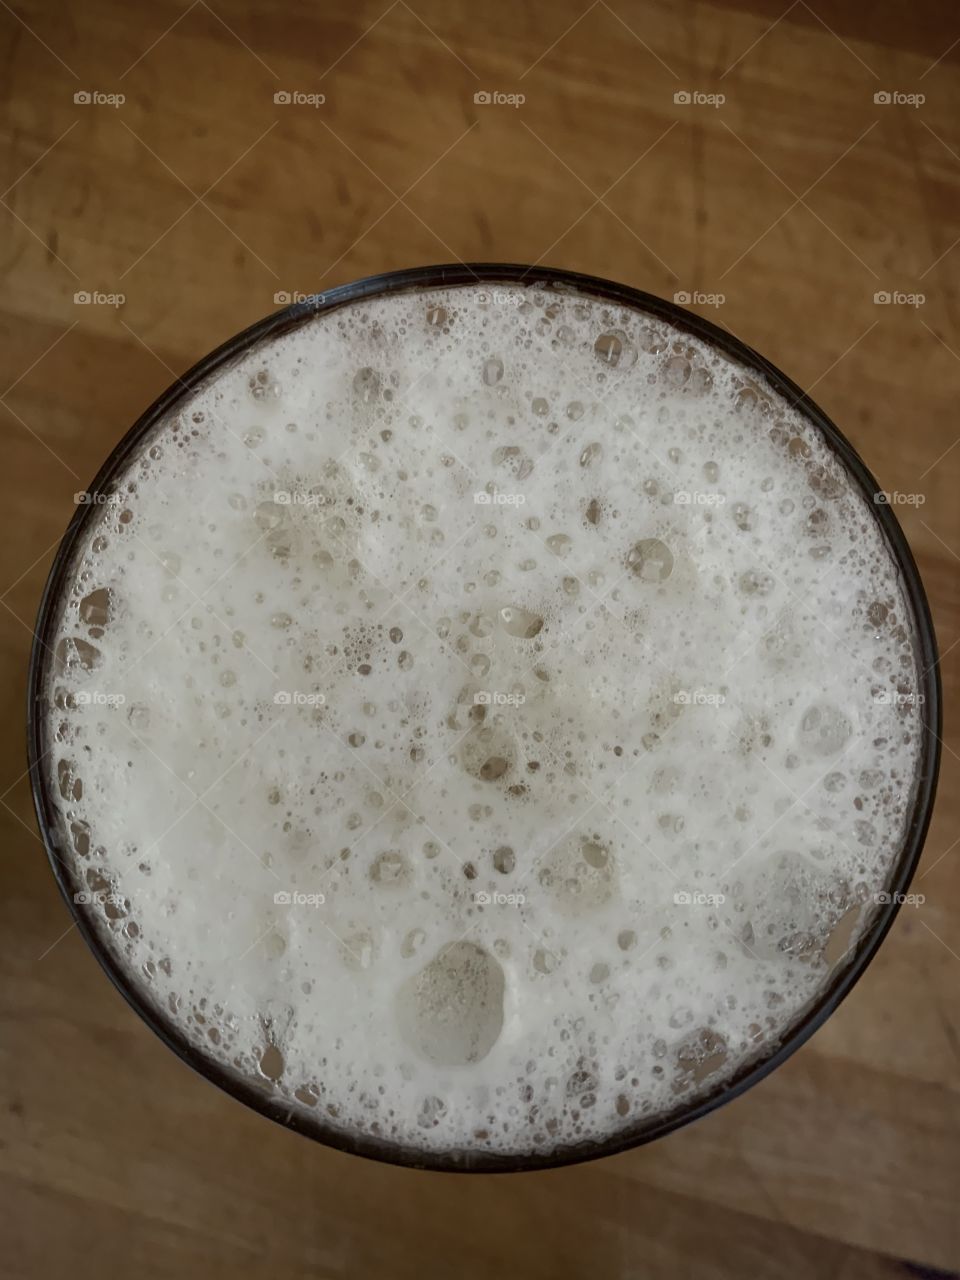 Overhead view of glass of beer